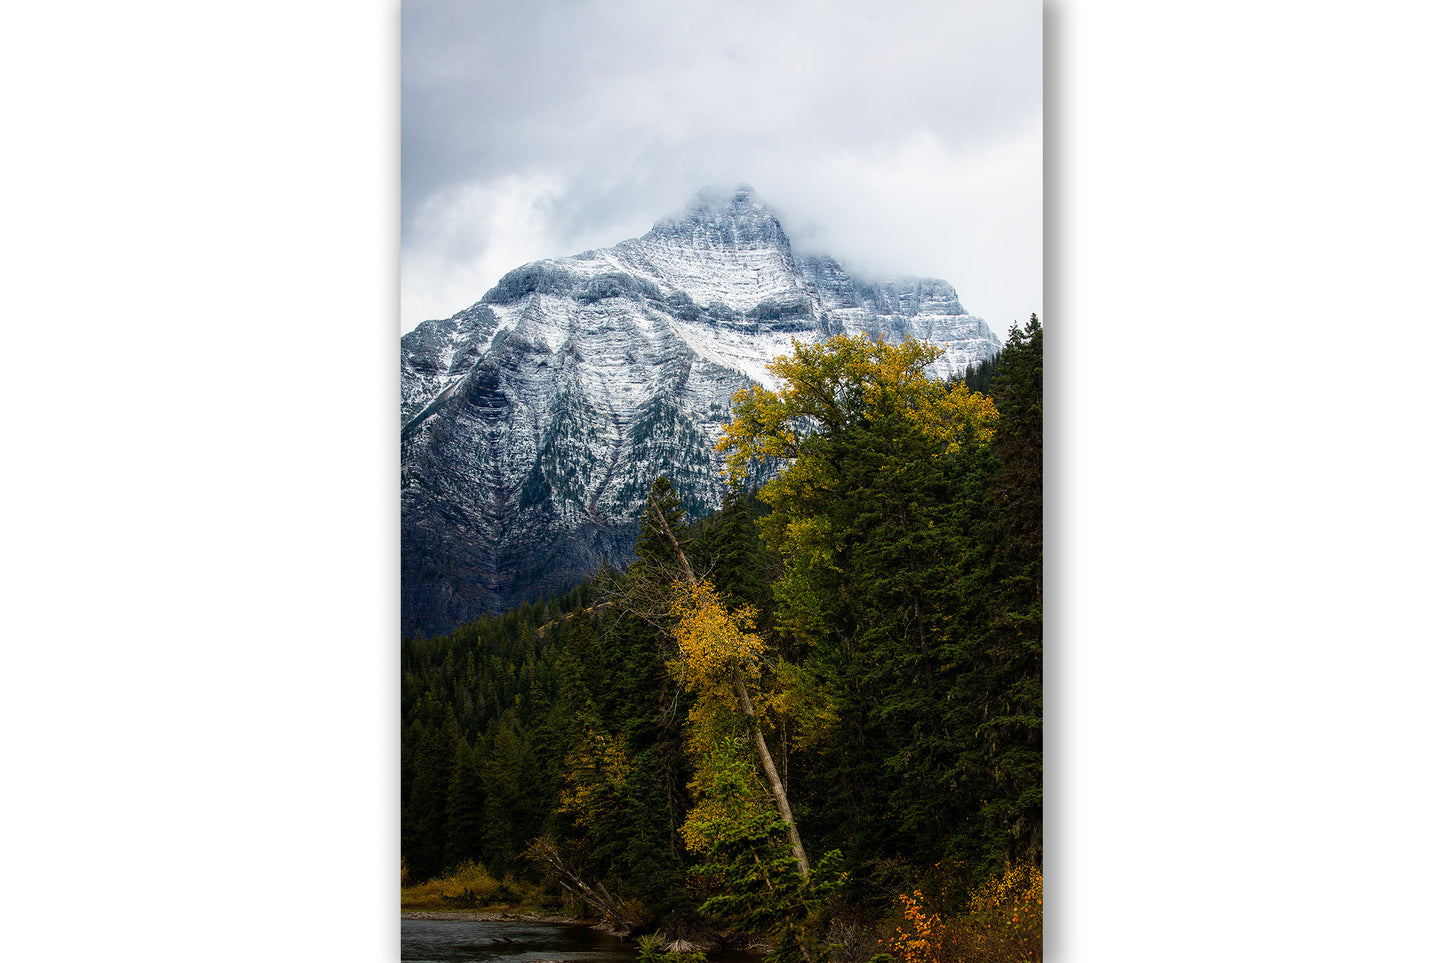 Vertical Rocky Mountain print of a snowy peak over trees with fall color on an autumn day at Glacier National Park, Montana by Sean Ramsey of Southern Plains Photography.